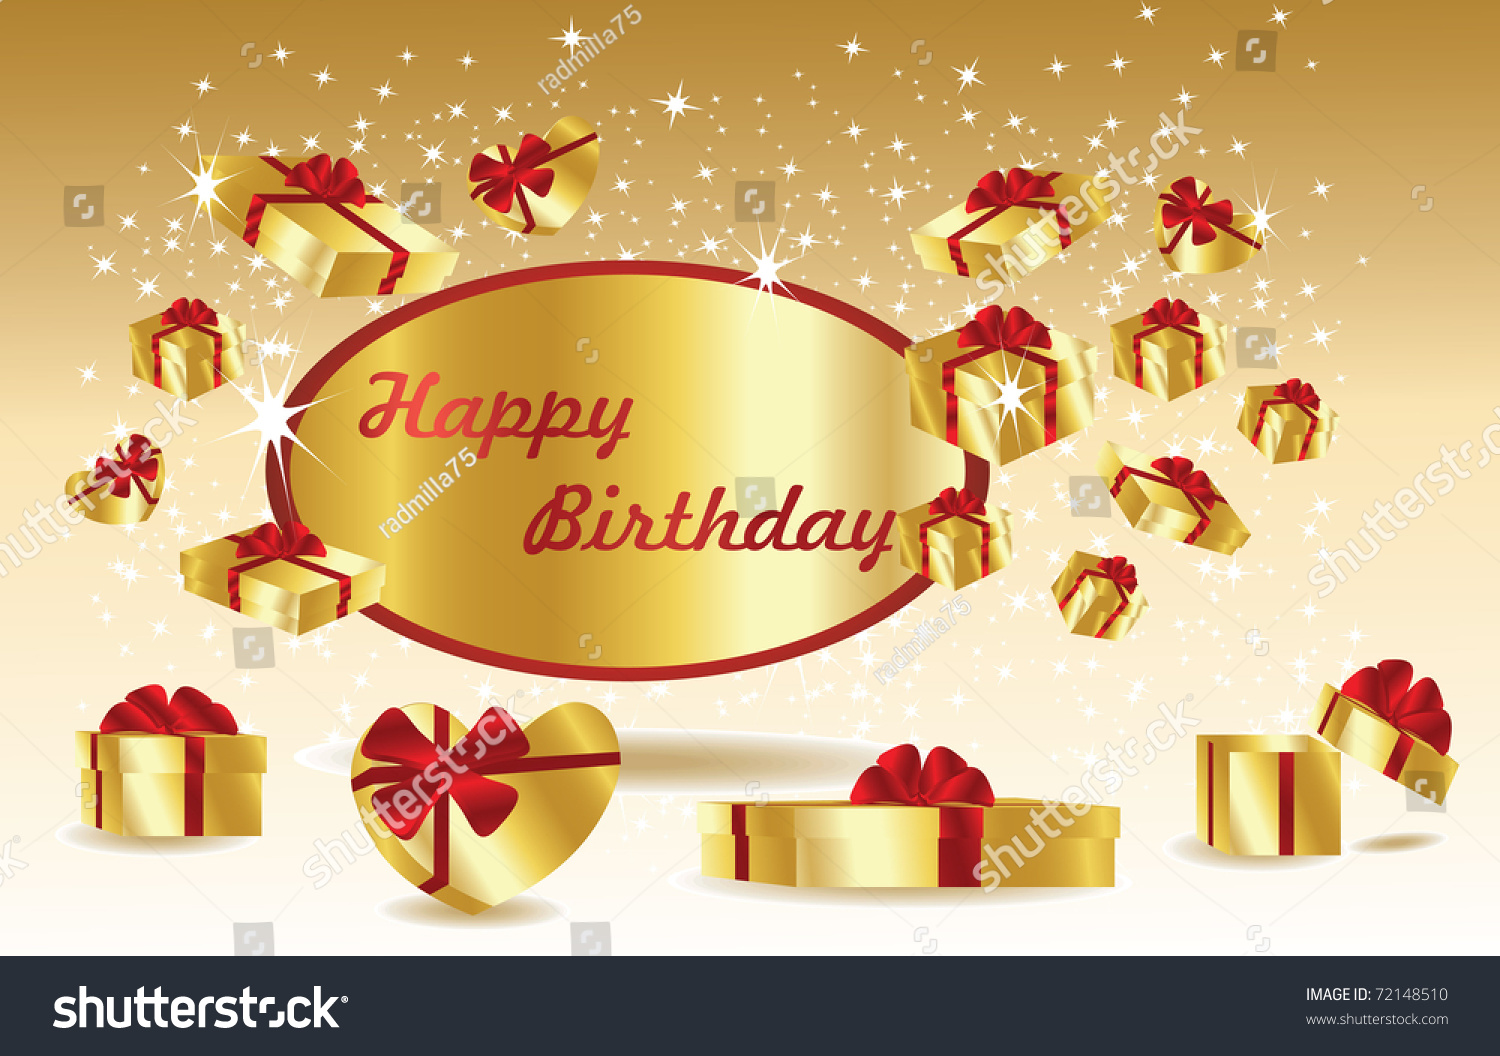 Gold Birthday Card Gifts Stock Vector 72148510 - Shutterstock